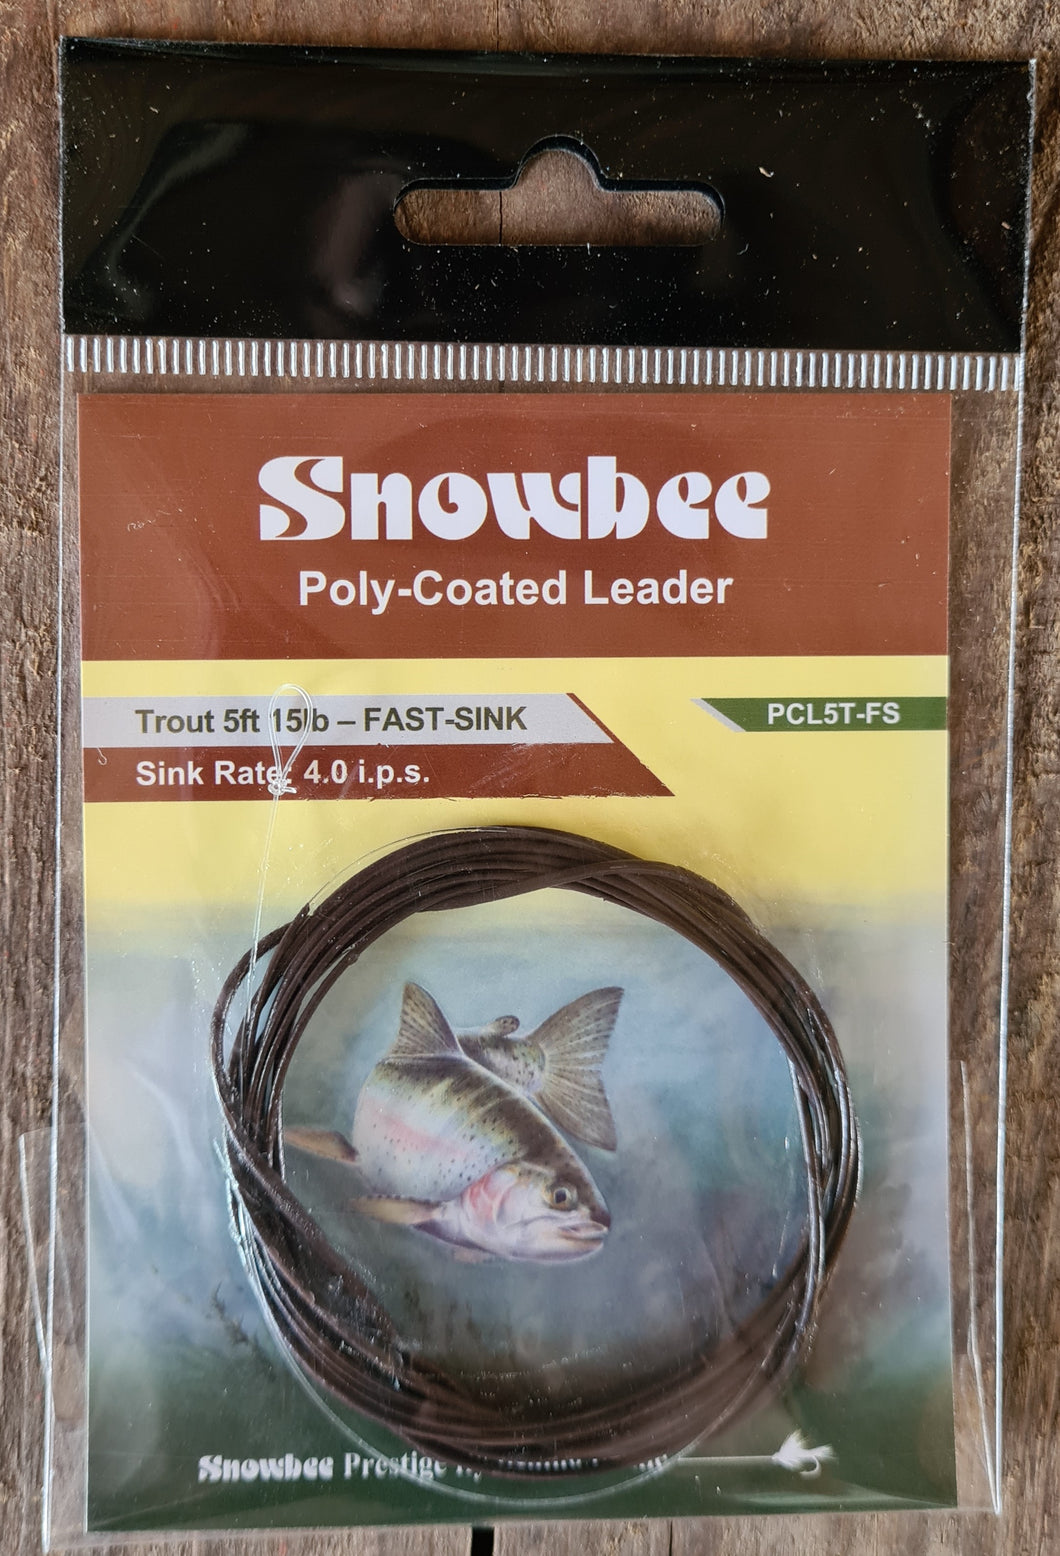 Snowbee Poly-Coated Leader PCL5T-FS